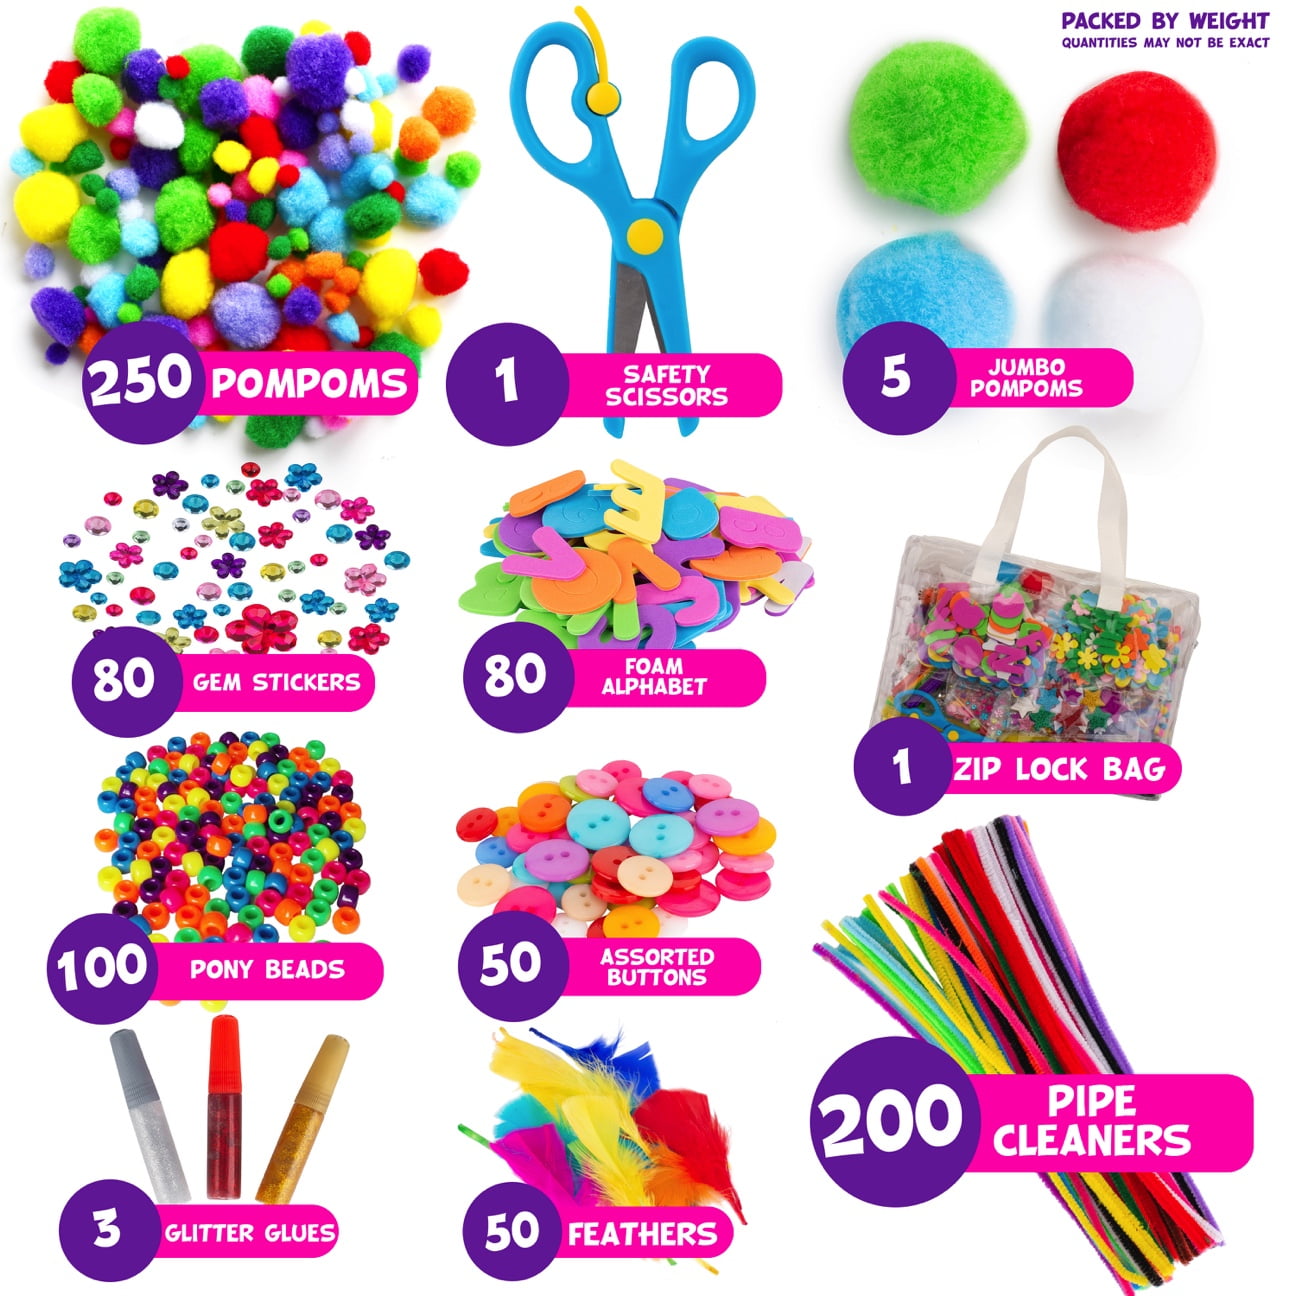 45 Fun Craft Kits for Kids! - Gym Craft Laundry